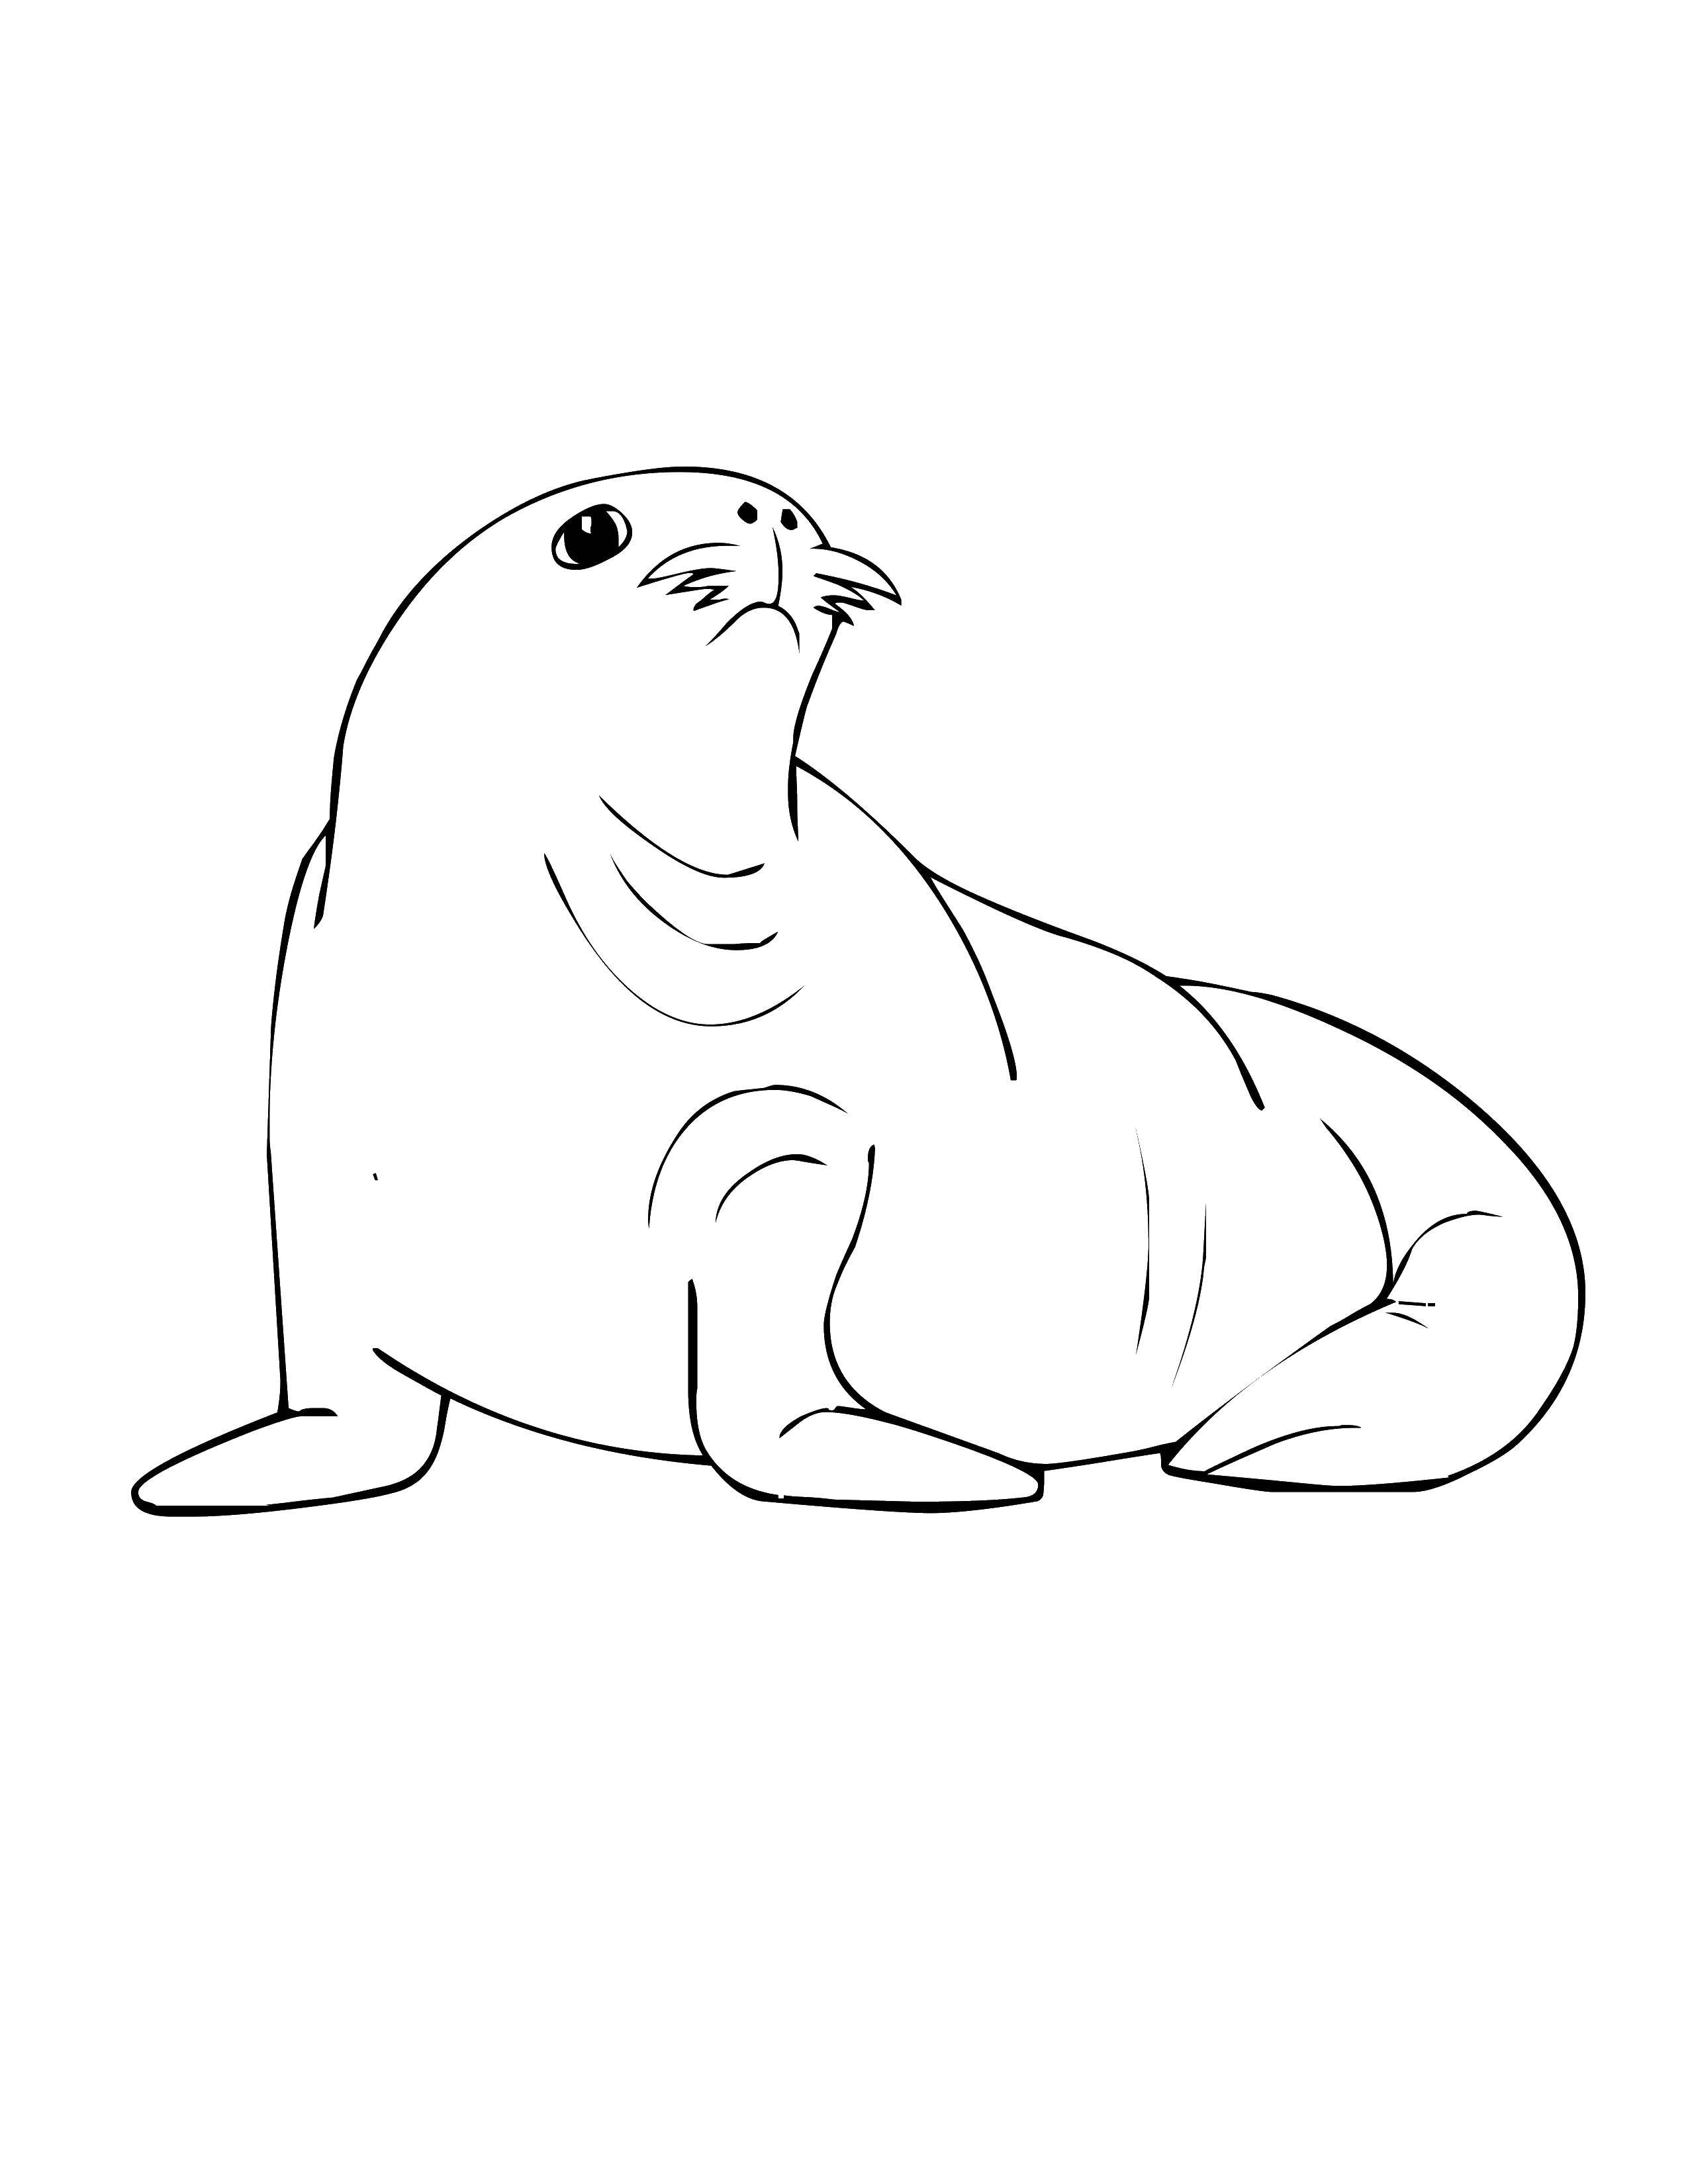 Coloring Marine seal. Category animals. Tags:  seal, whiskers.